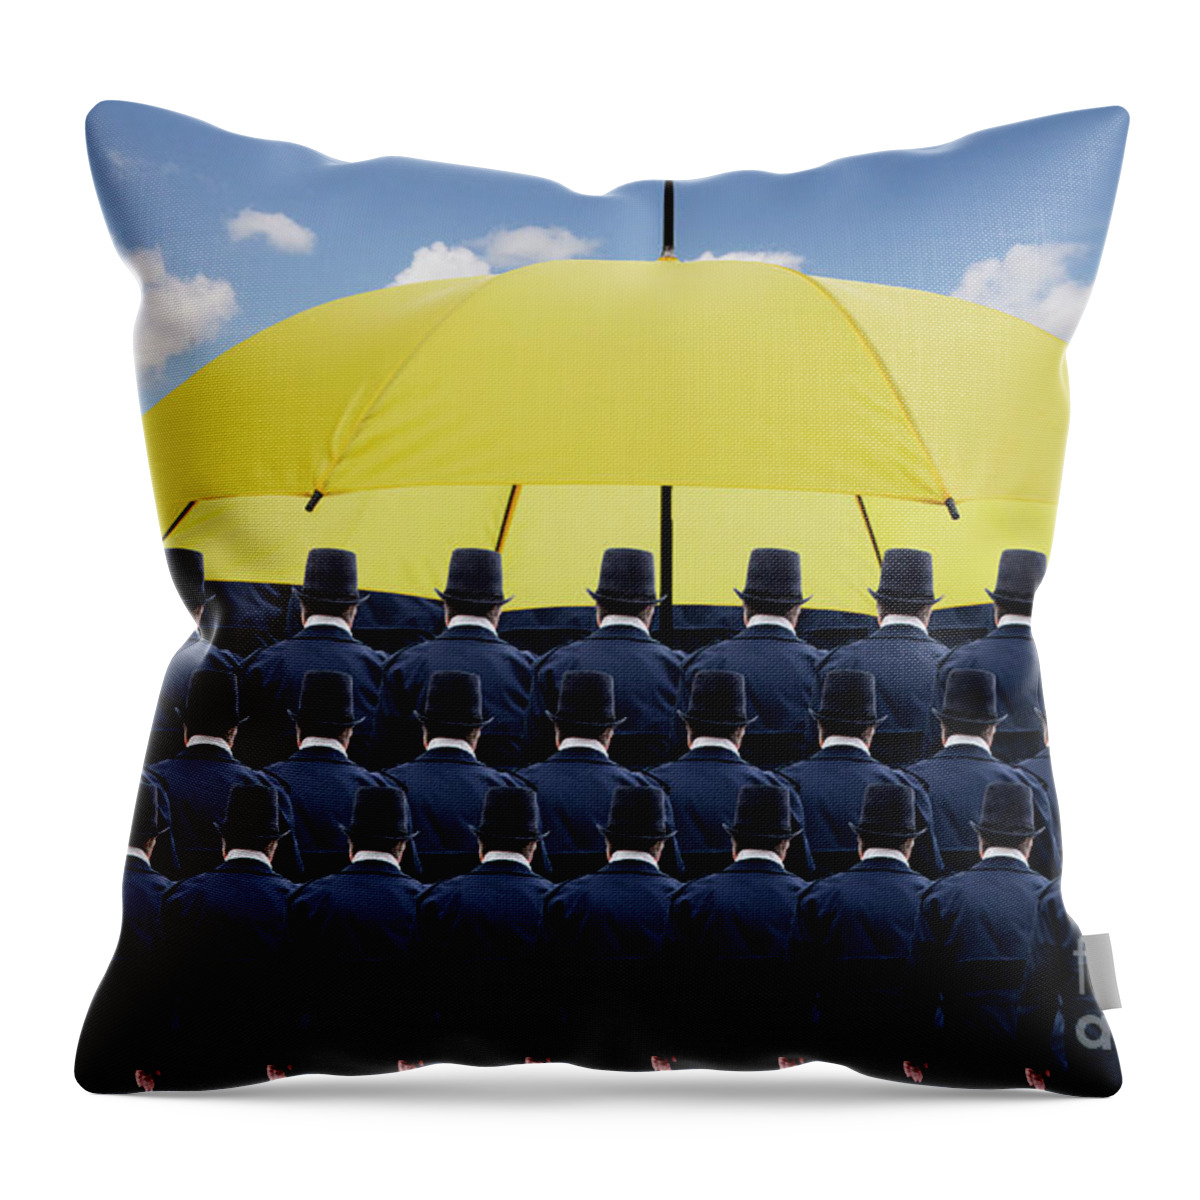 Dream Throw Pillow featuring the photograph He Was Told Specifically Not To Bring His Umbrella Today by Bob Christopher